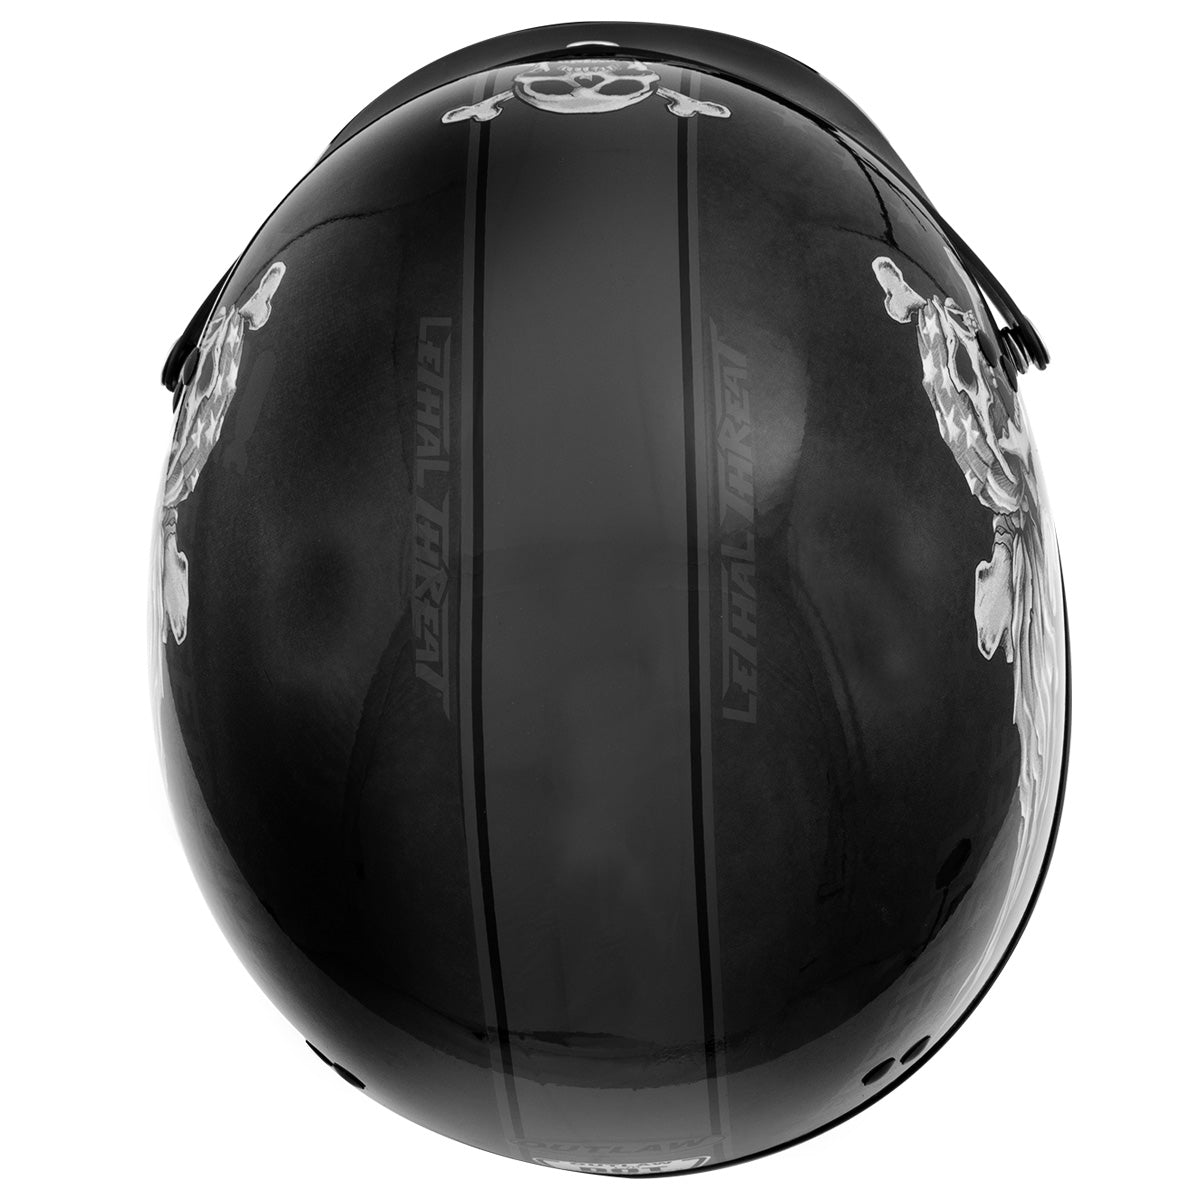 Outlaw T-70 'Freedom Skull' Advanced Motorcycle Half Helmet with Removable Visor